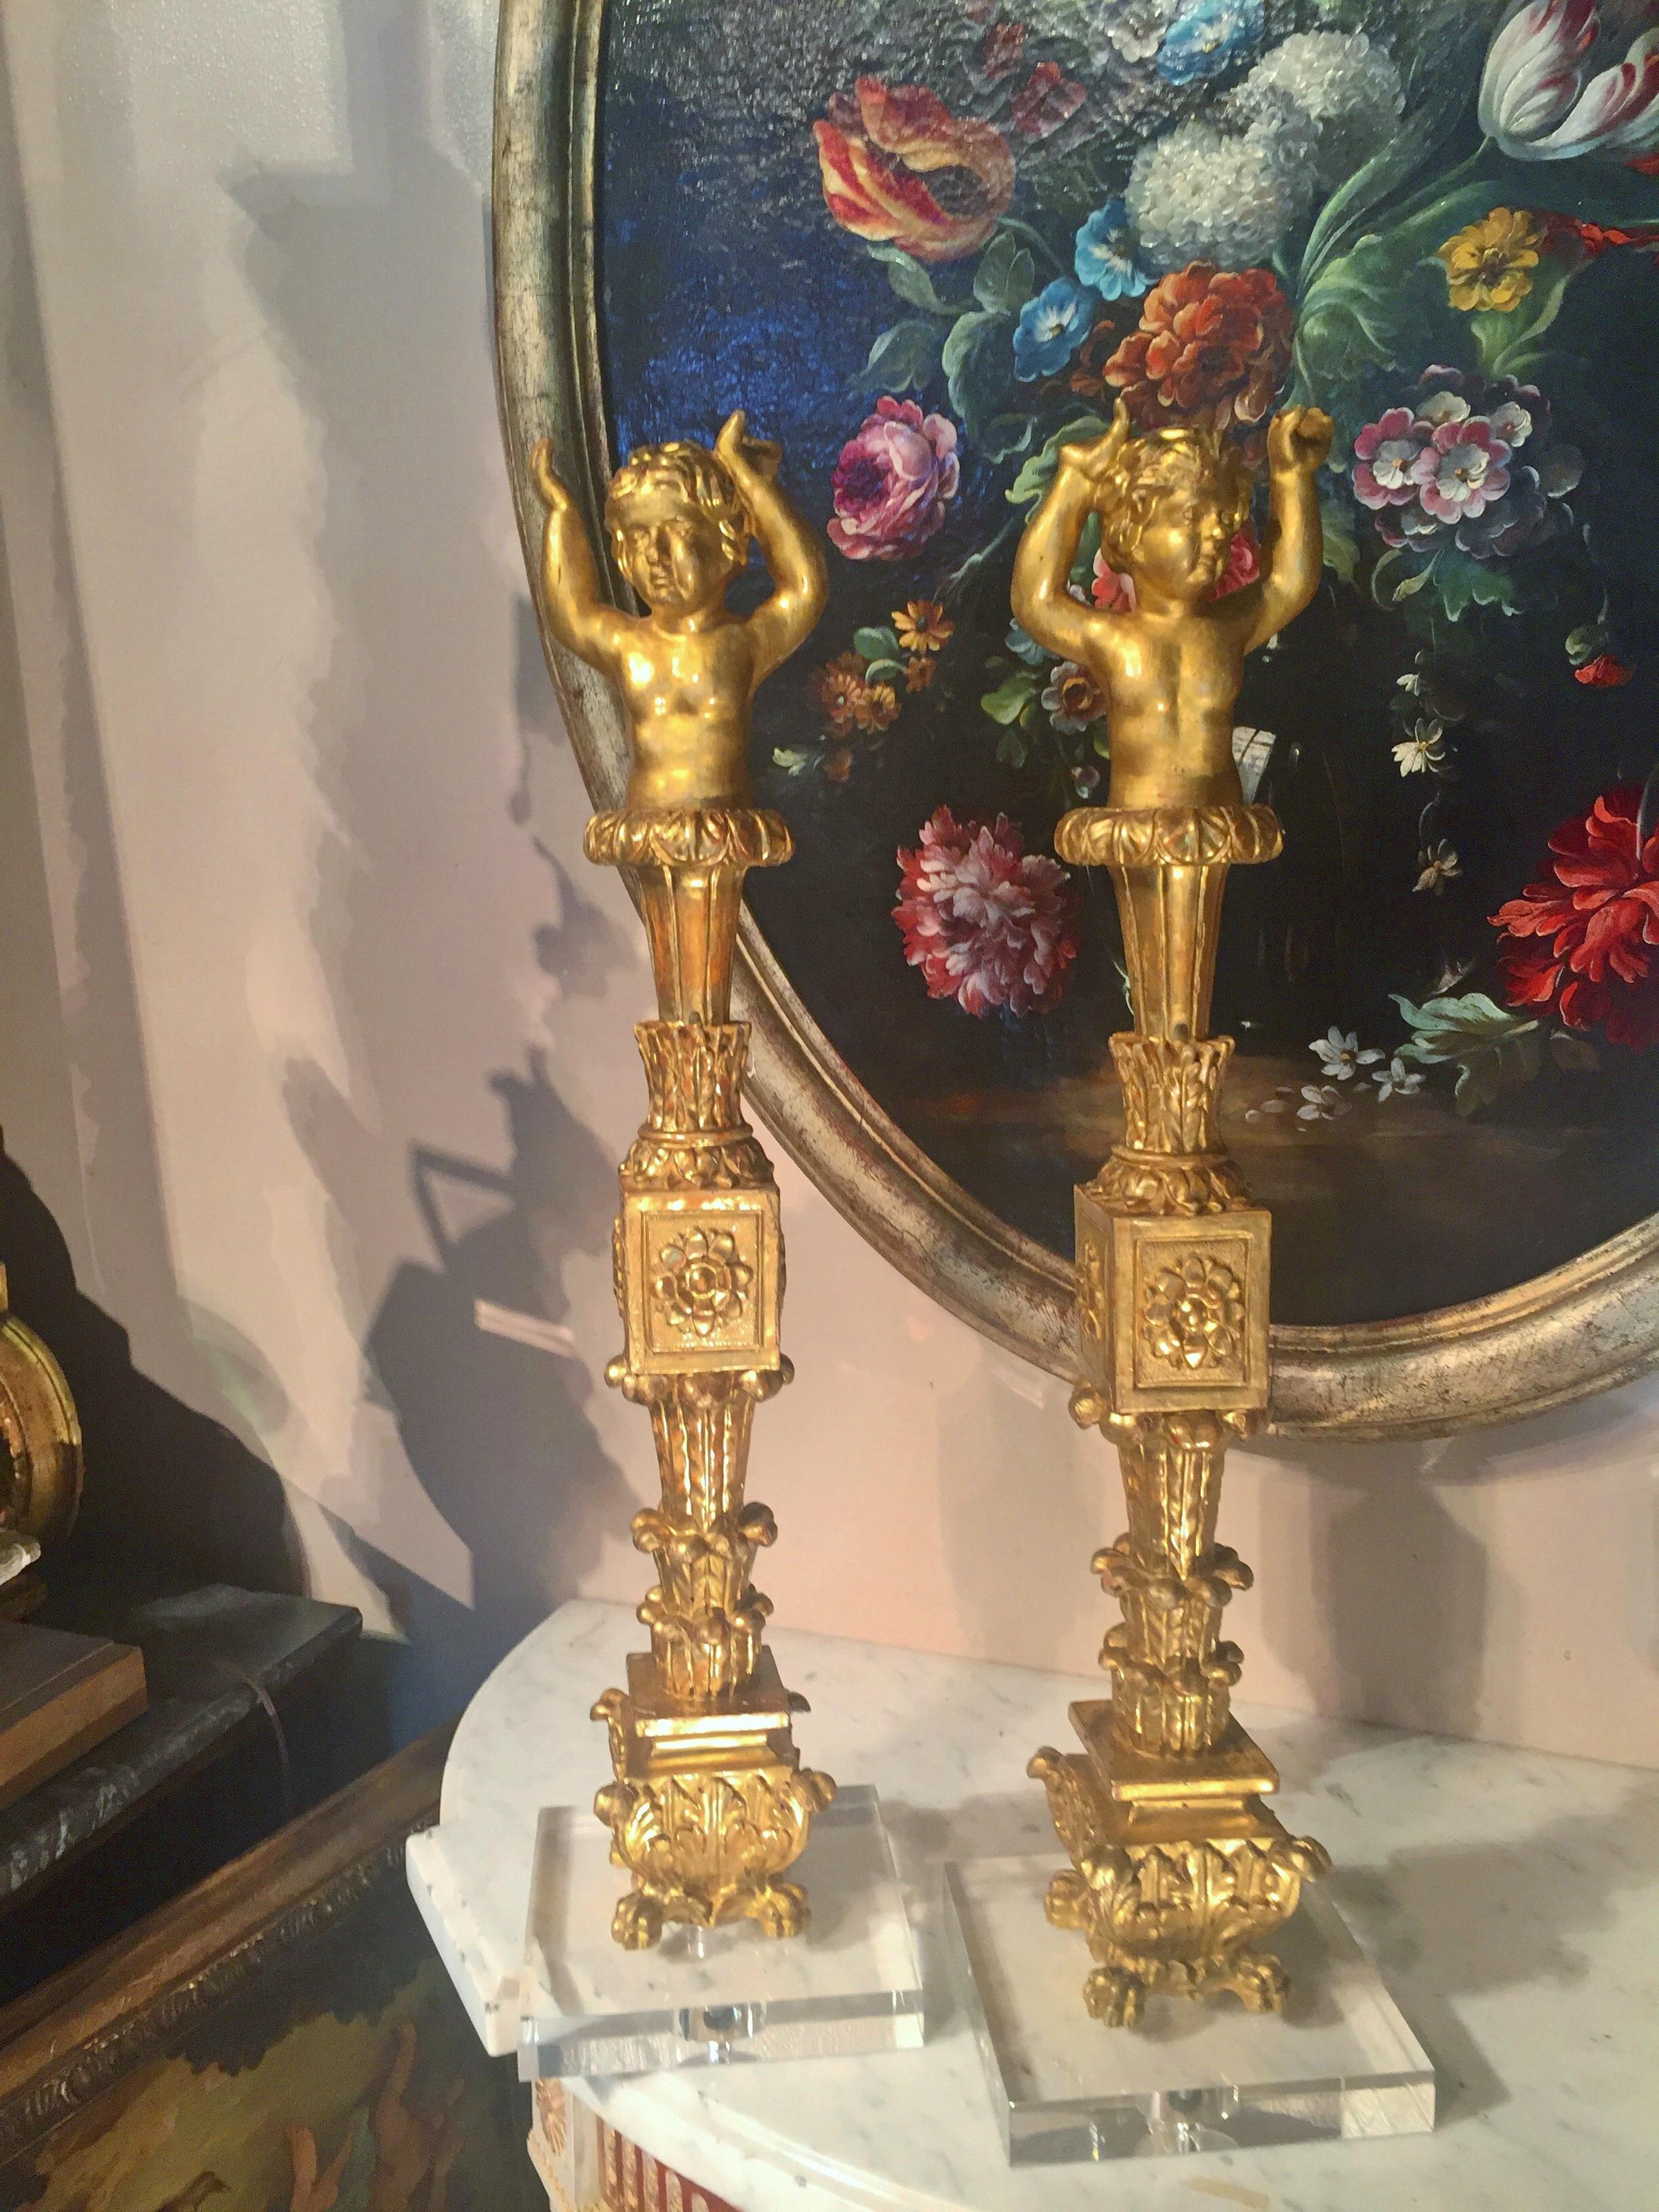 On acrylic bases (6 inch square ). Gilt and water gilt, cherubs on top of neoclassical stylized columns. 

Either off a cabinet or boiserie ( panelling ), the hands in upward support. Some fingers not missing but not finished as molding ran across